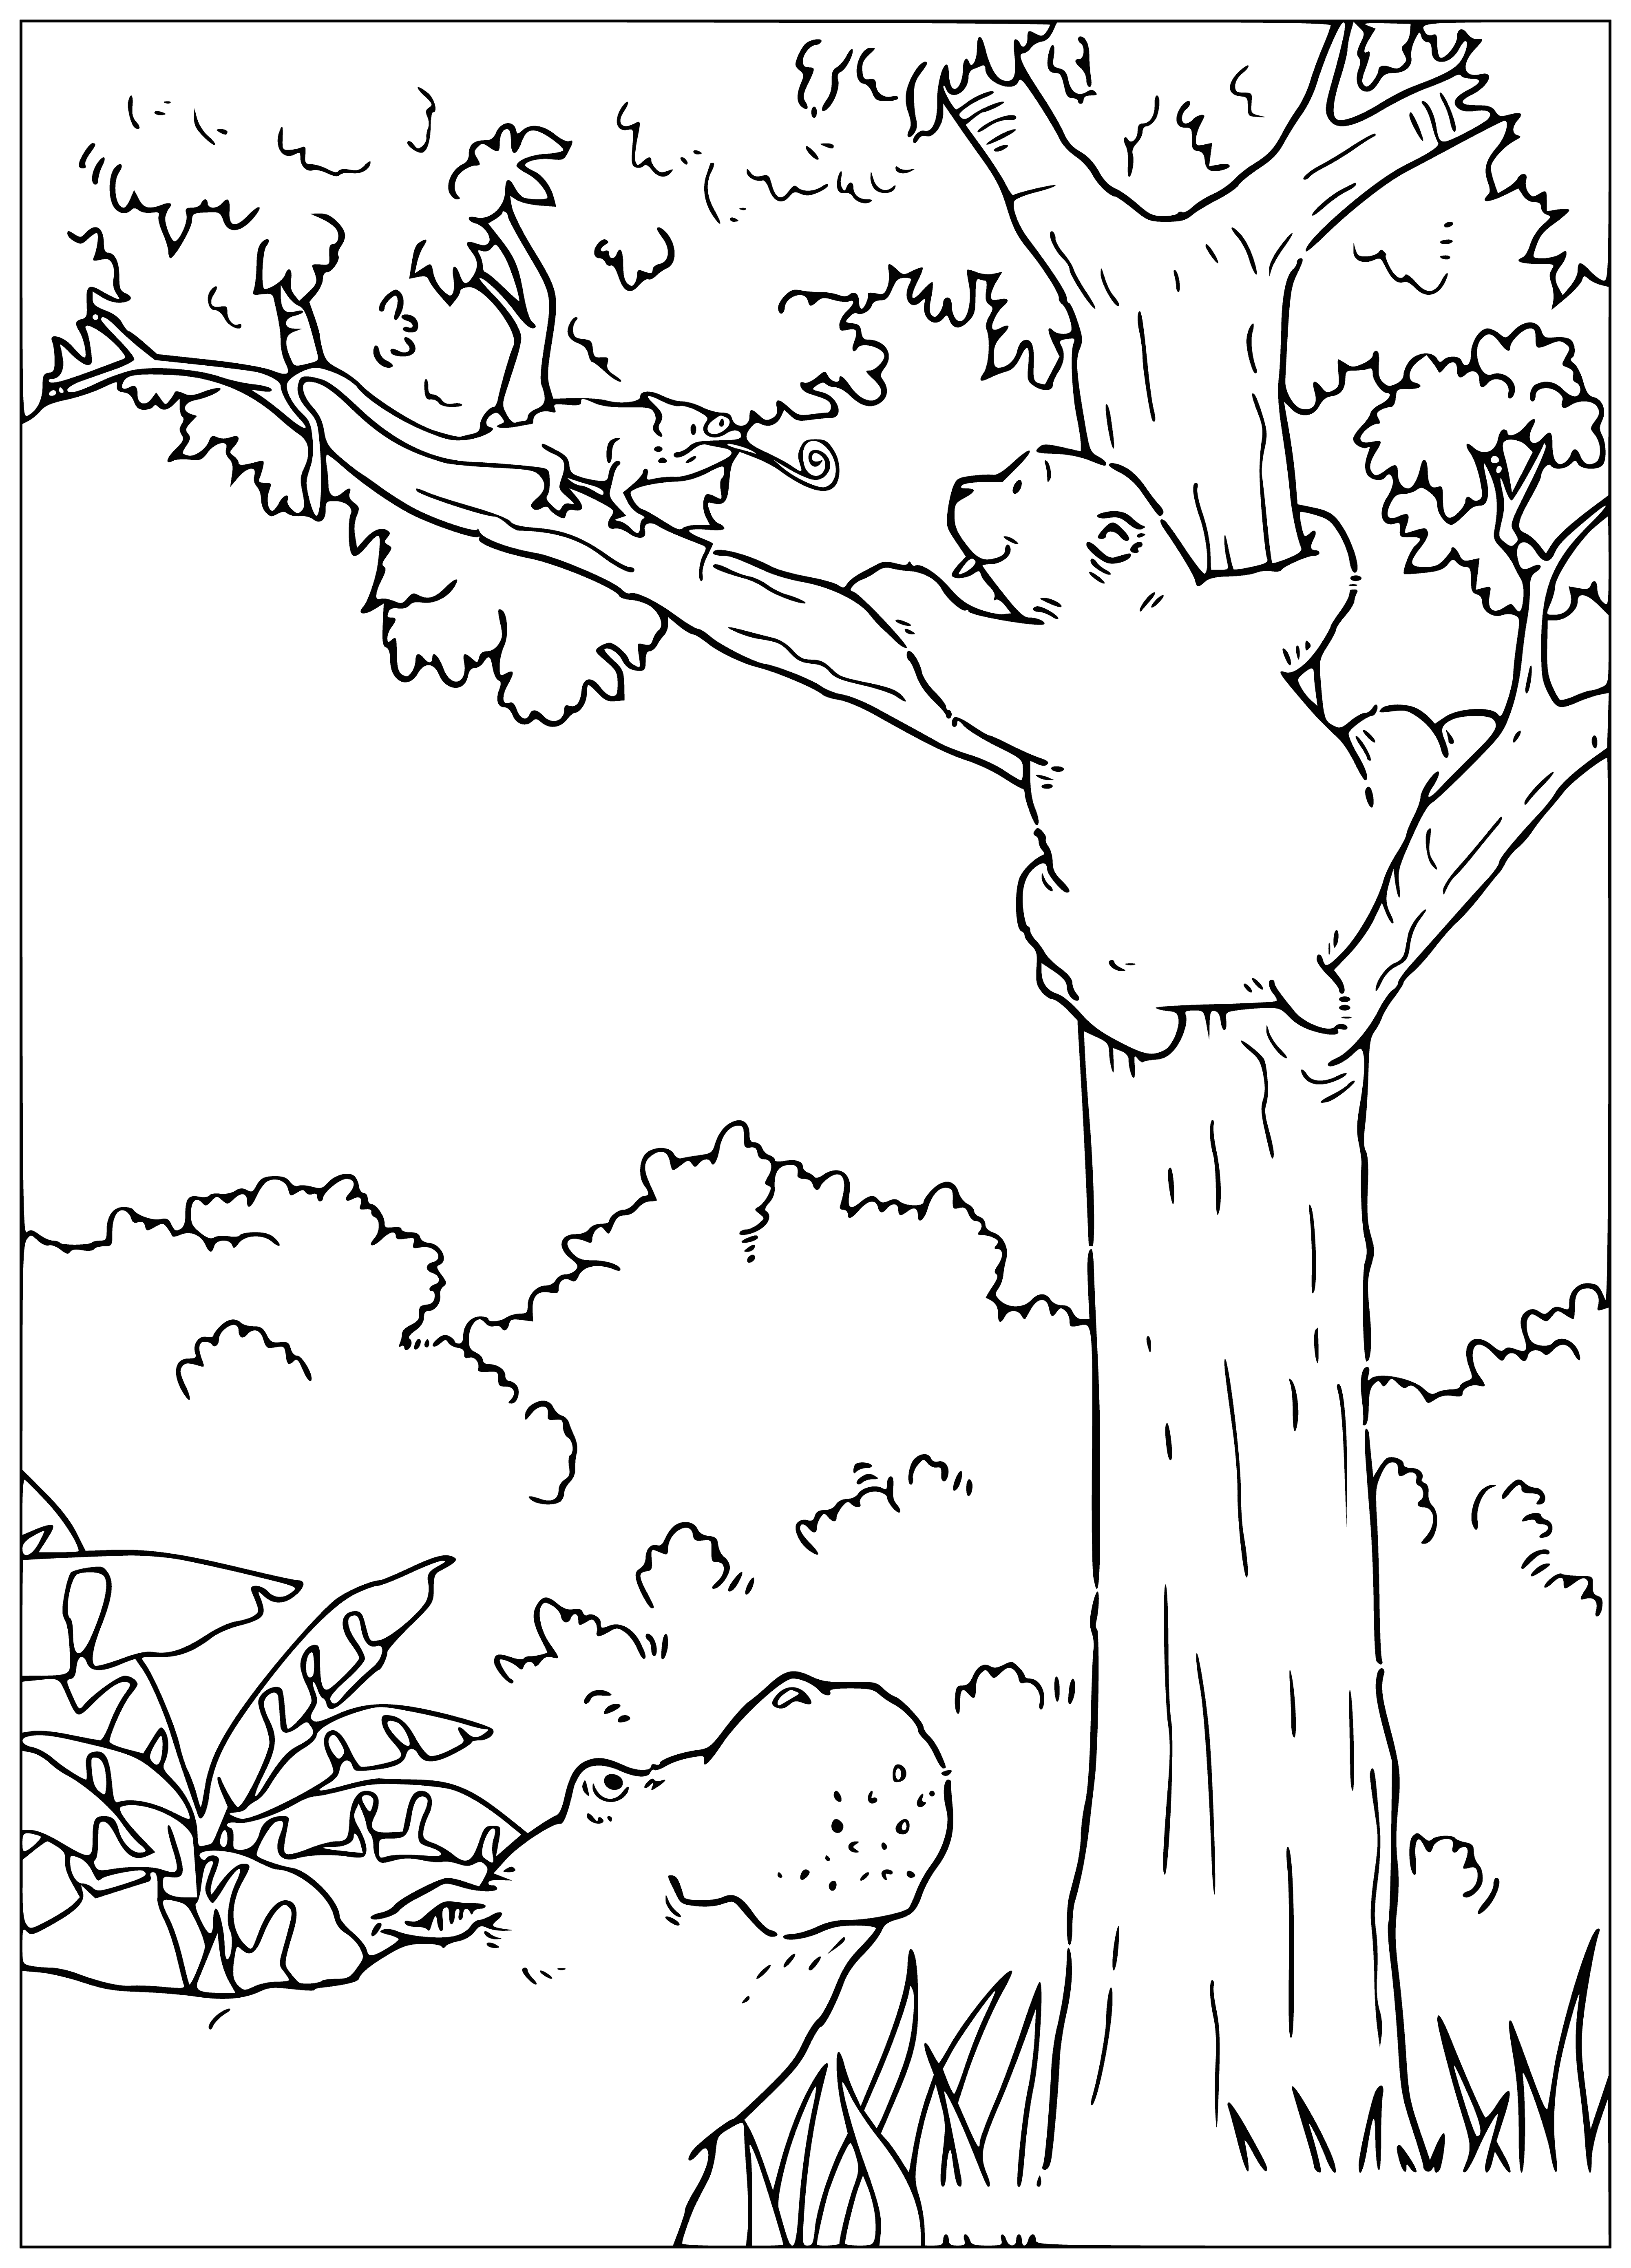 coloring page: Polar bear curiously holds colorful chameleon on leash in coloring page.